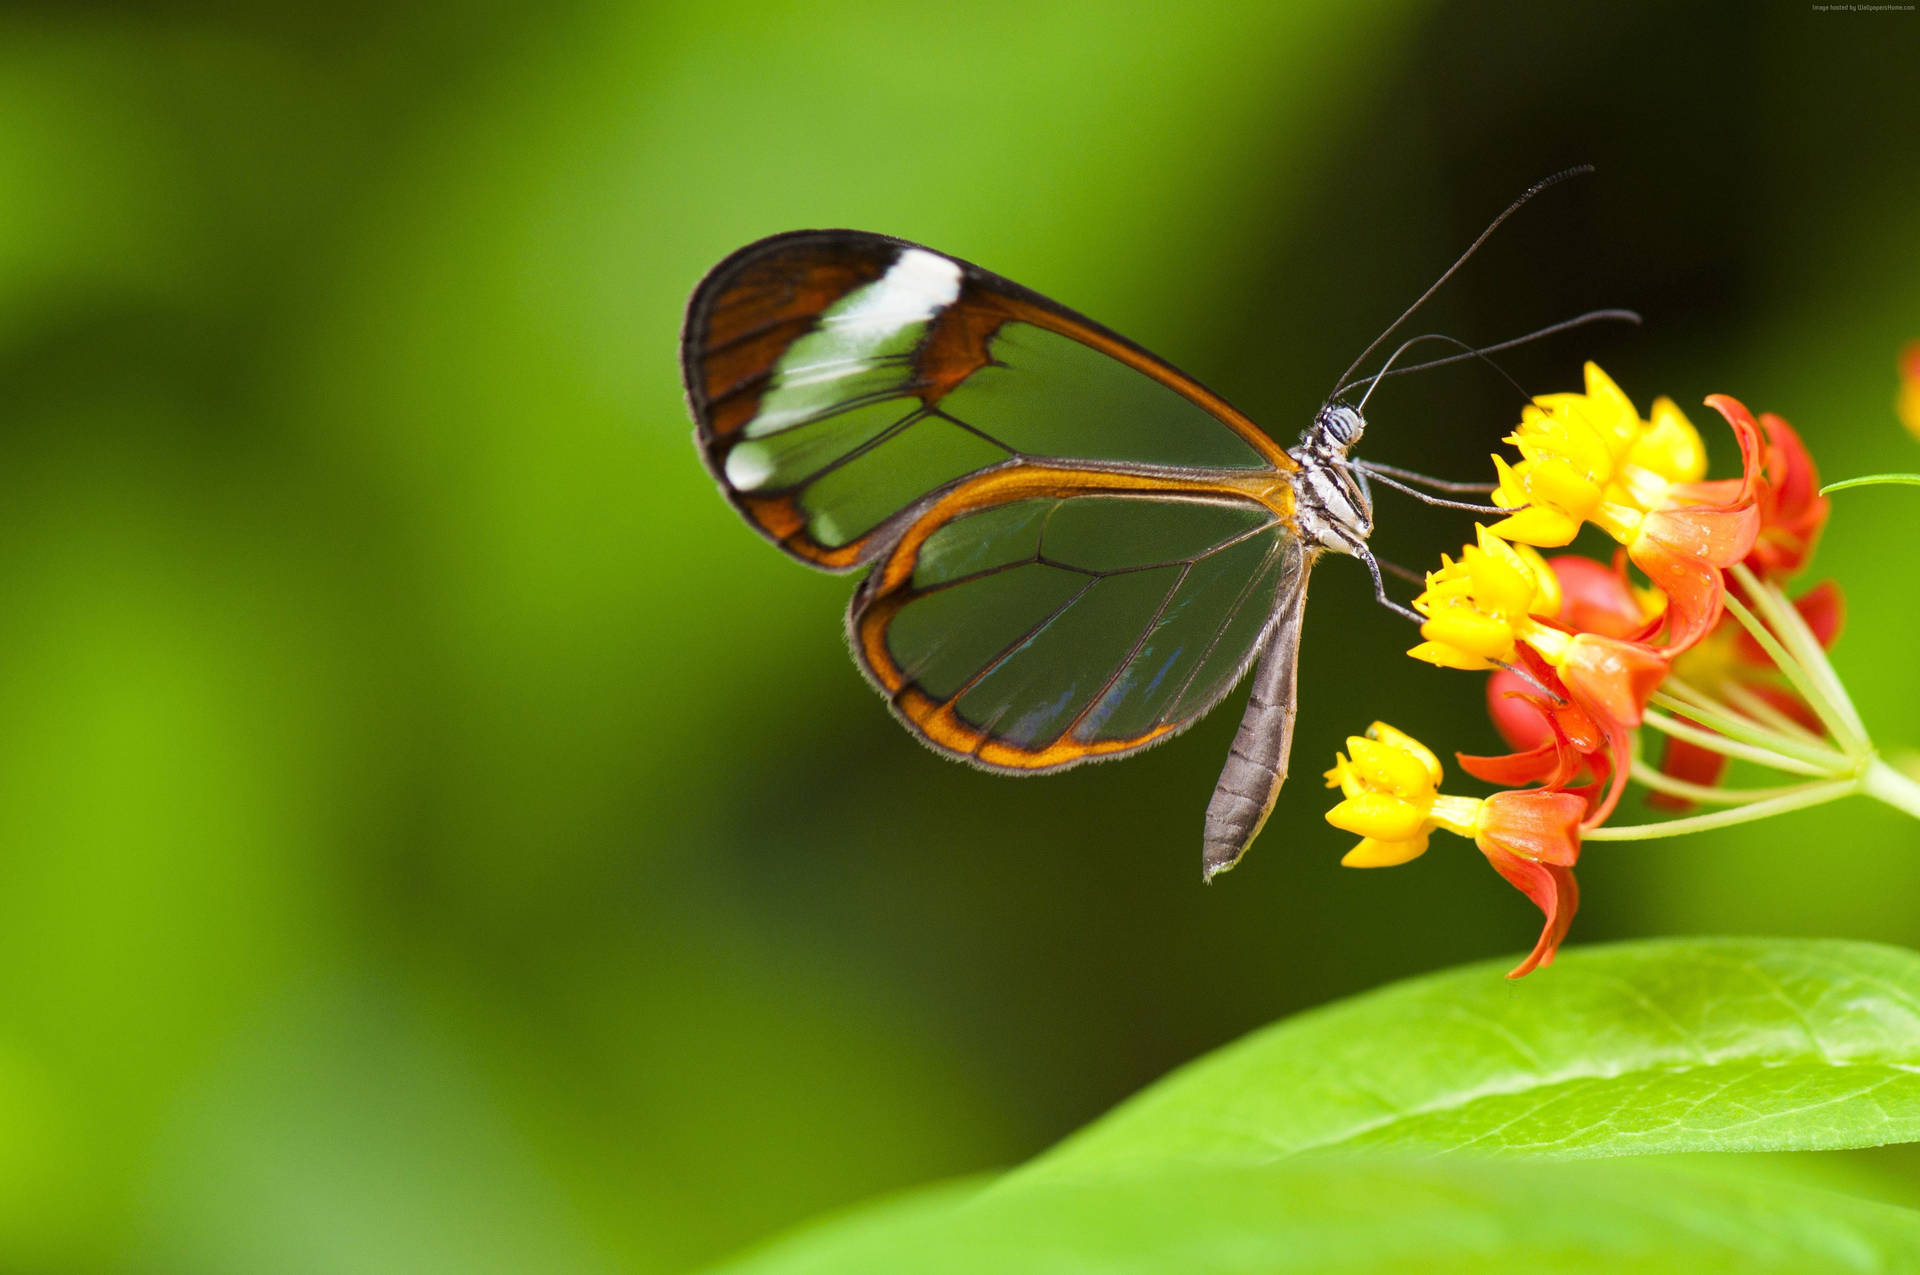 Insect Butterfly With Transparent Wings Wallpaper